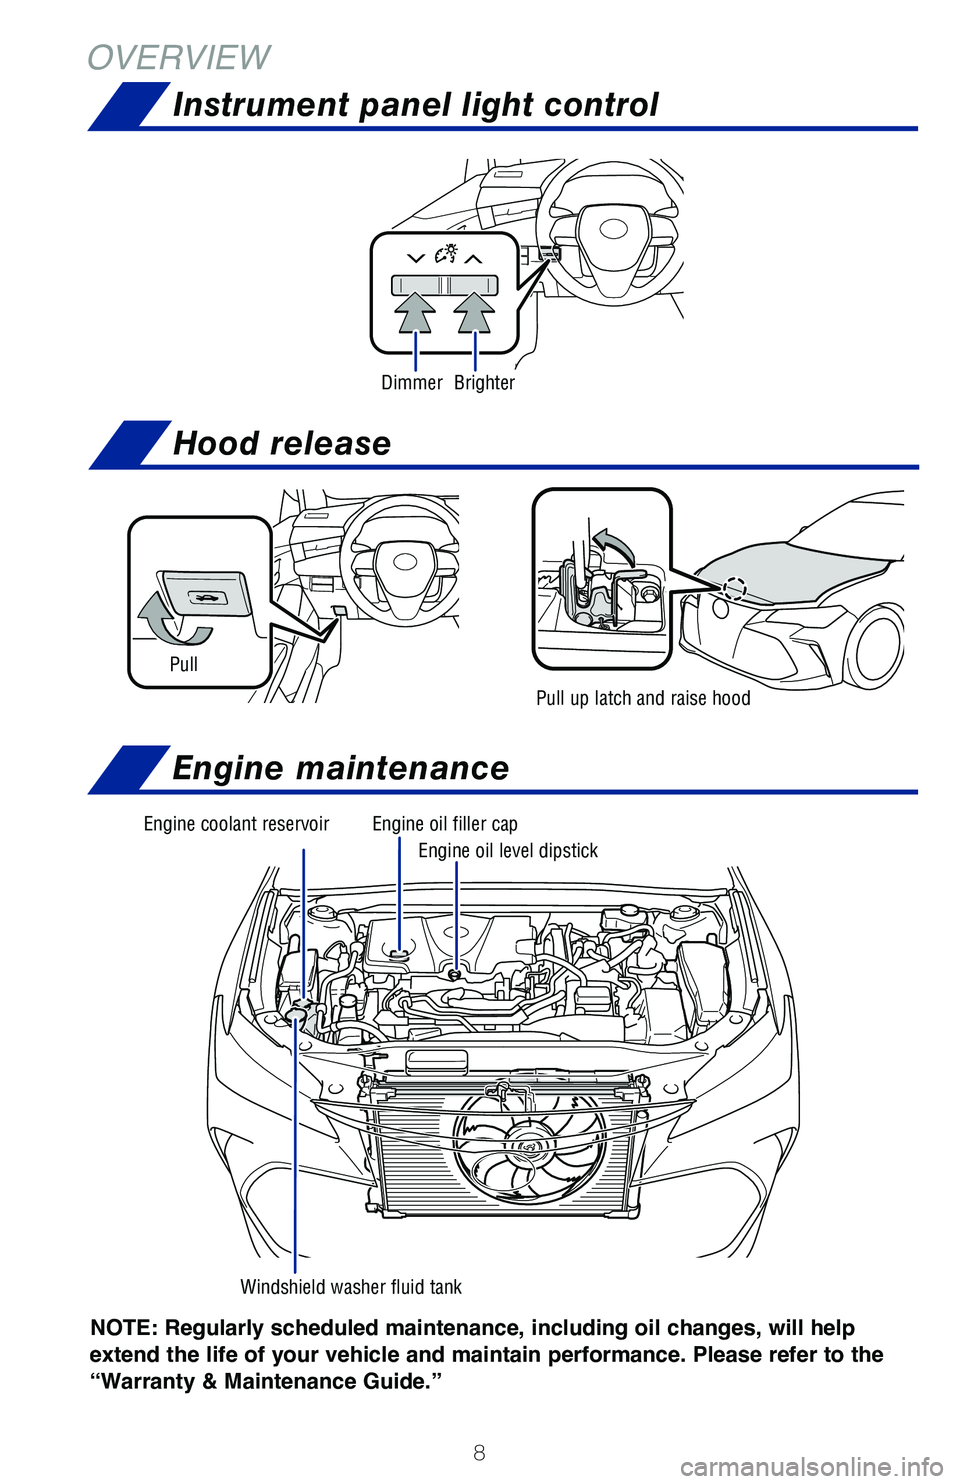 TOYOTA AVALON HYBRID 2020  Owners Manual (in English) 8
OVERVIEW
NOTE: Regularly scheduled maintenance, including  oil changes, will help 
extend the life of your vehicle and maintain performance. Please refer to the 
“Warranty & Maintenance Guide.”
